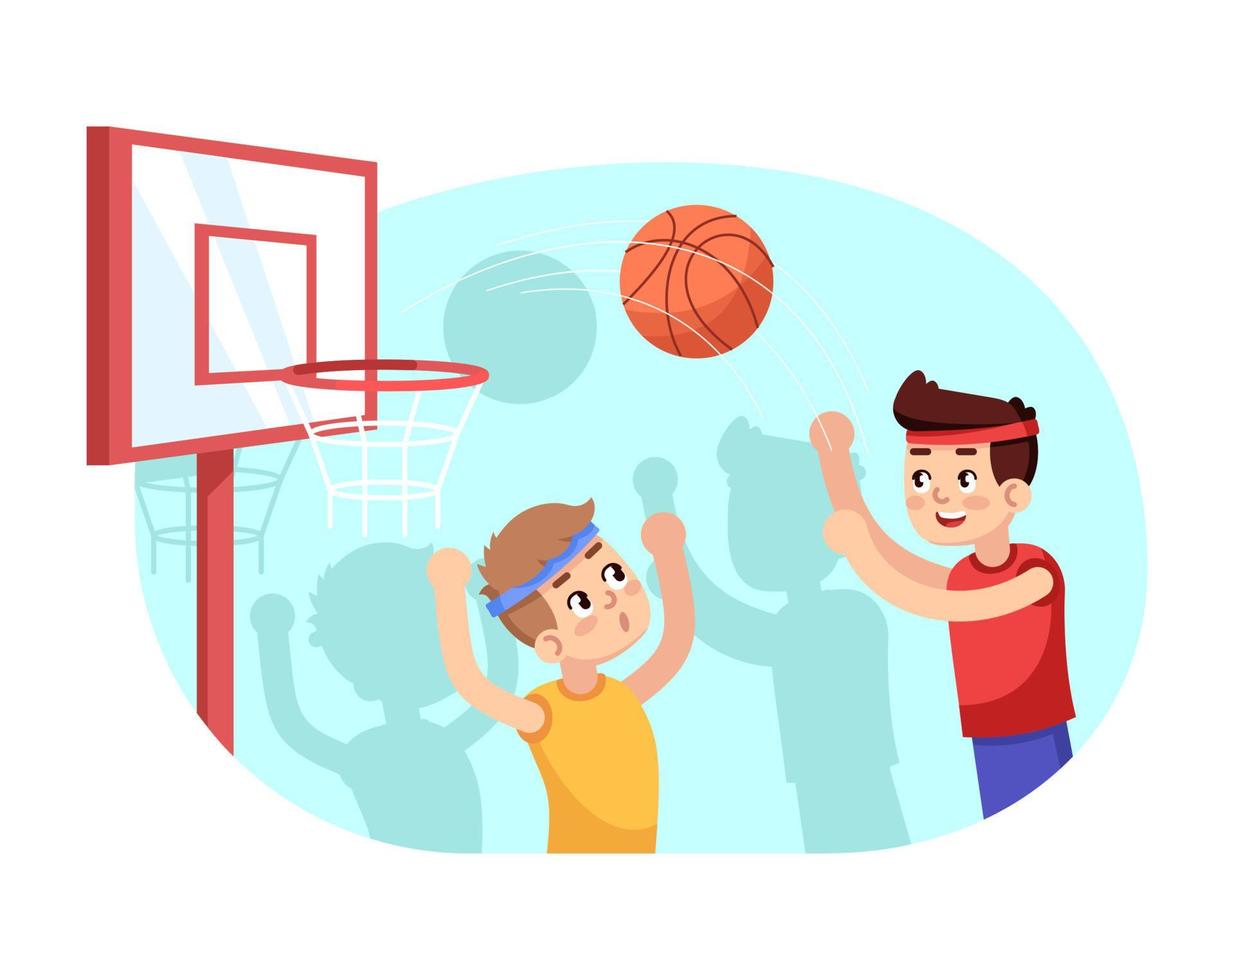 Boys playing basketball flat vector illustration. Sports section for children. Advanced training in team game for schoolchildren. After school activities. Kids athletic contest cartoon characters